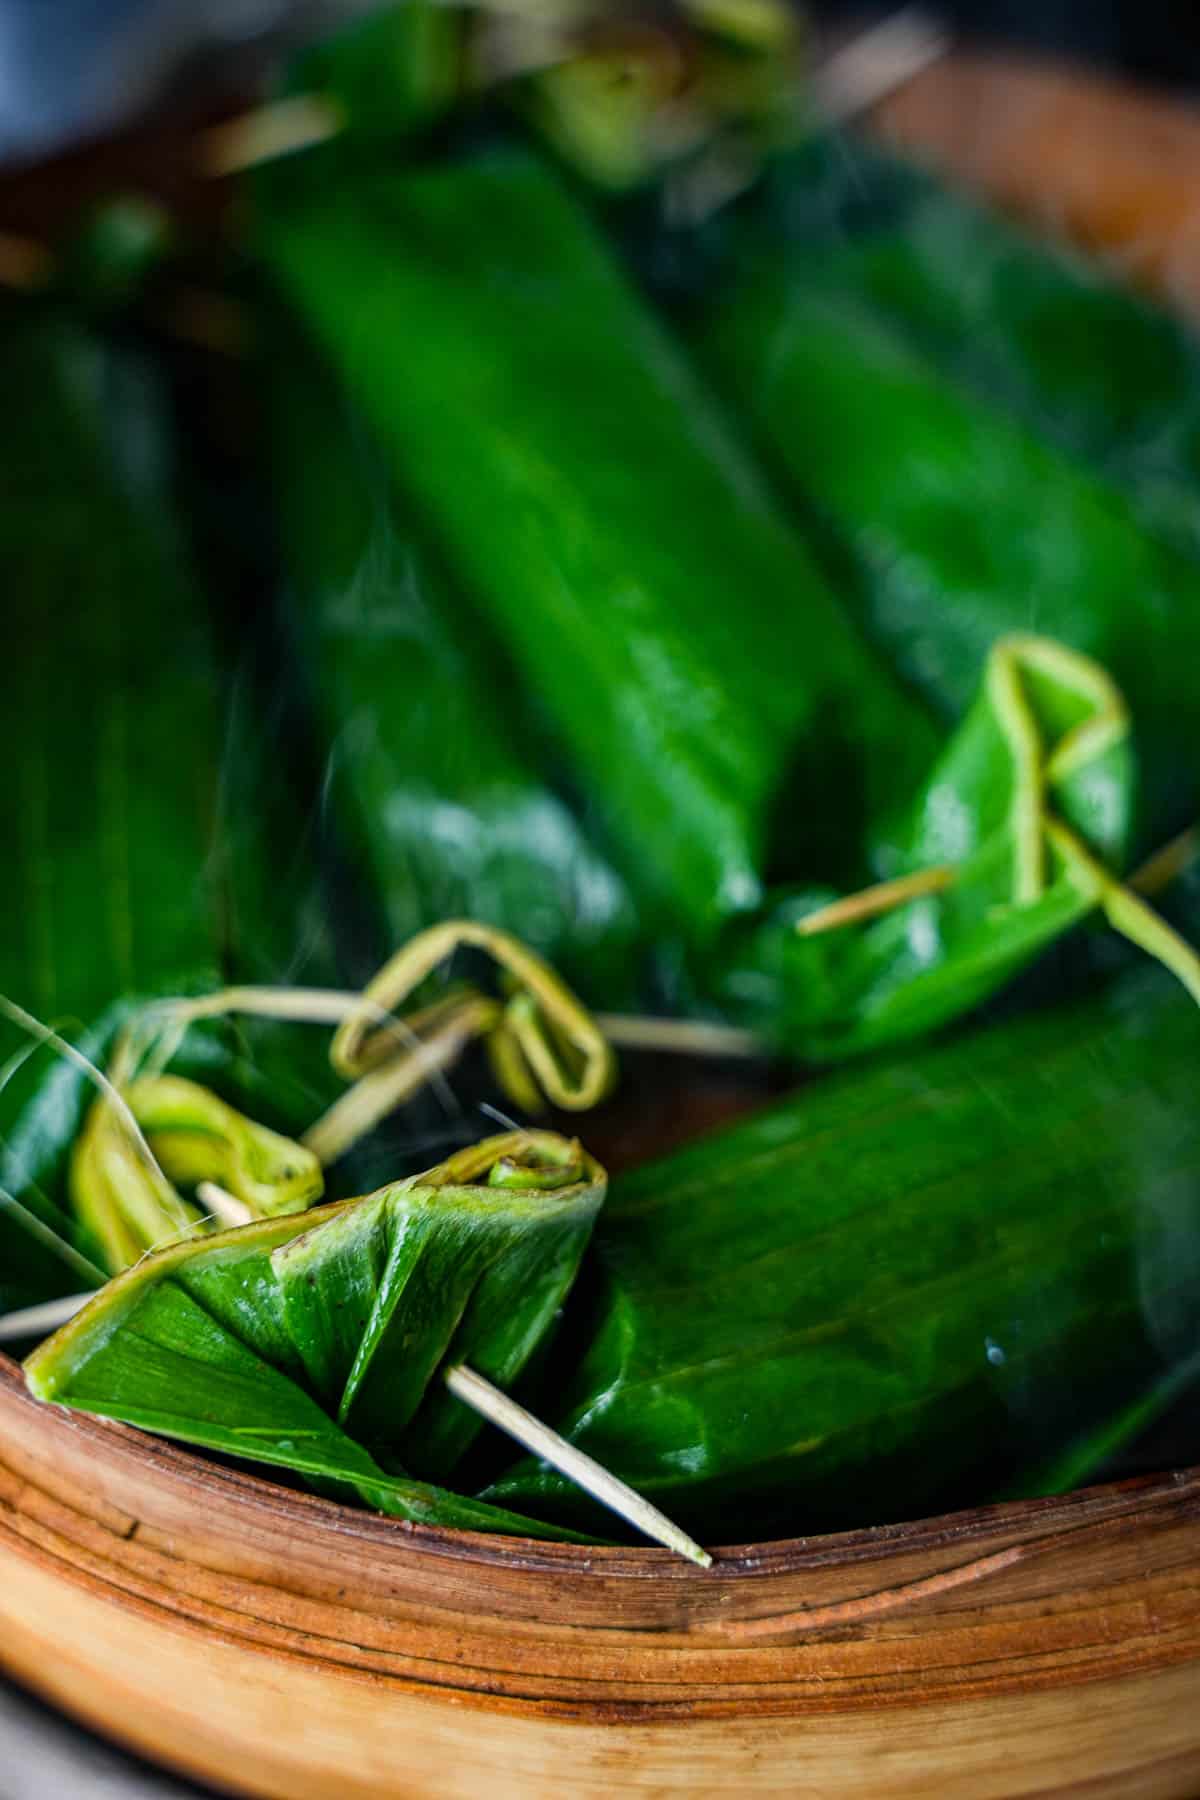 Steaming lontong in a bamboo steamer. You can see steam ricing up between the banana leaves.